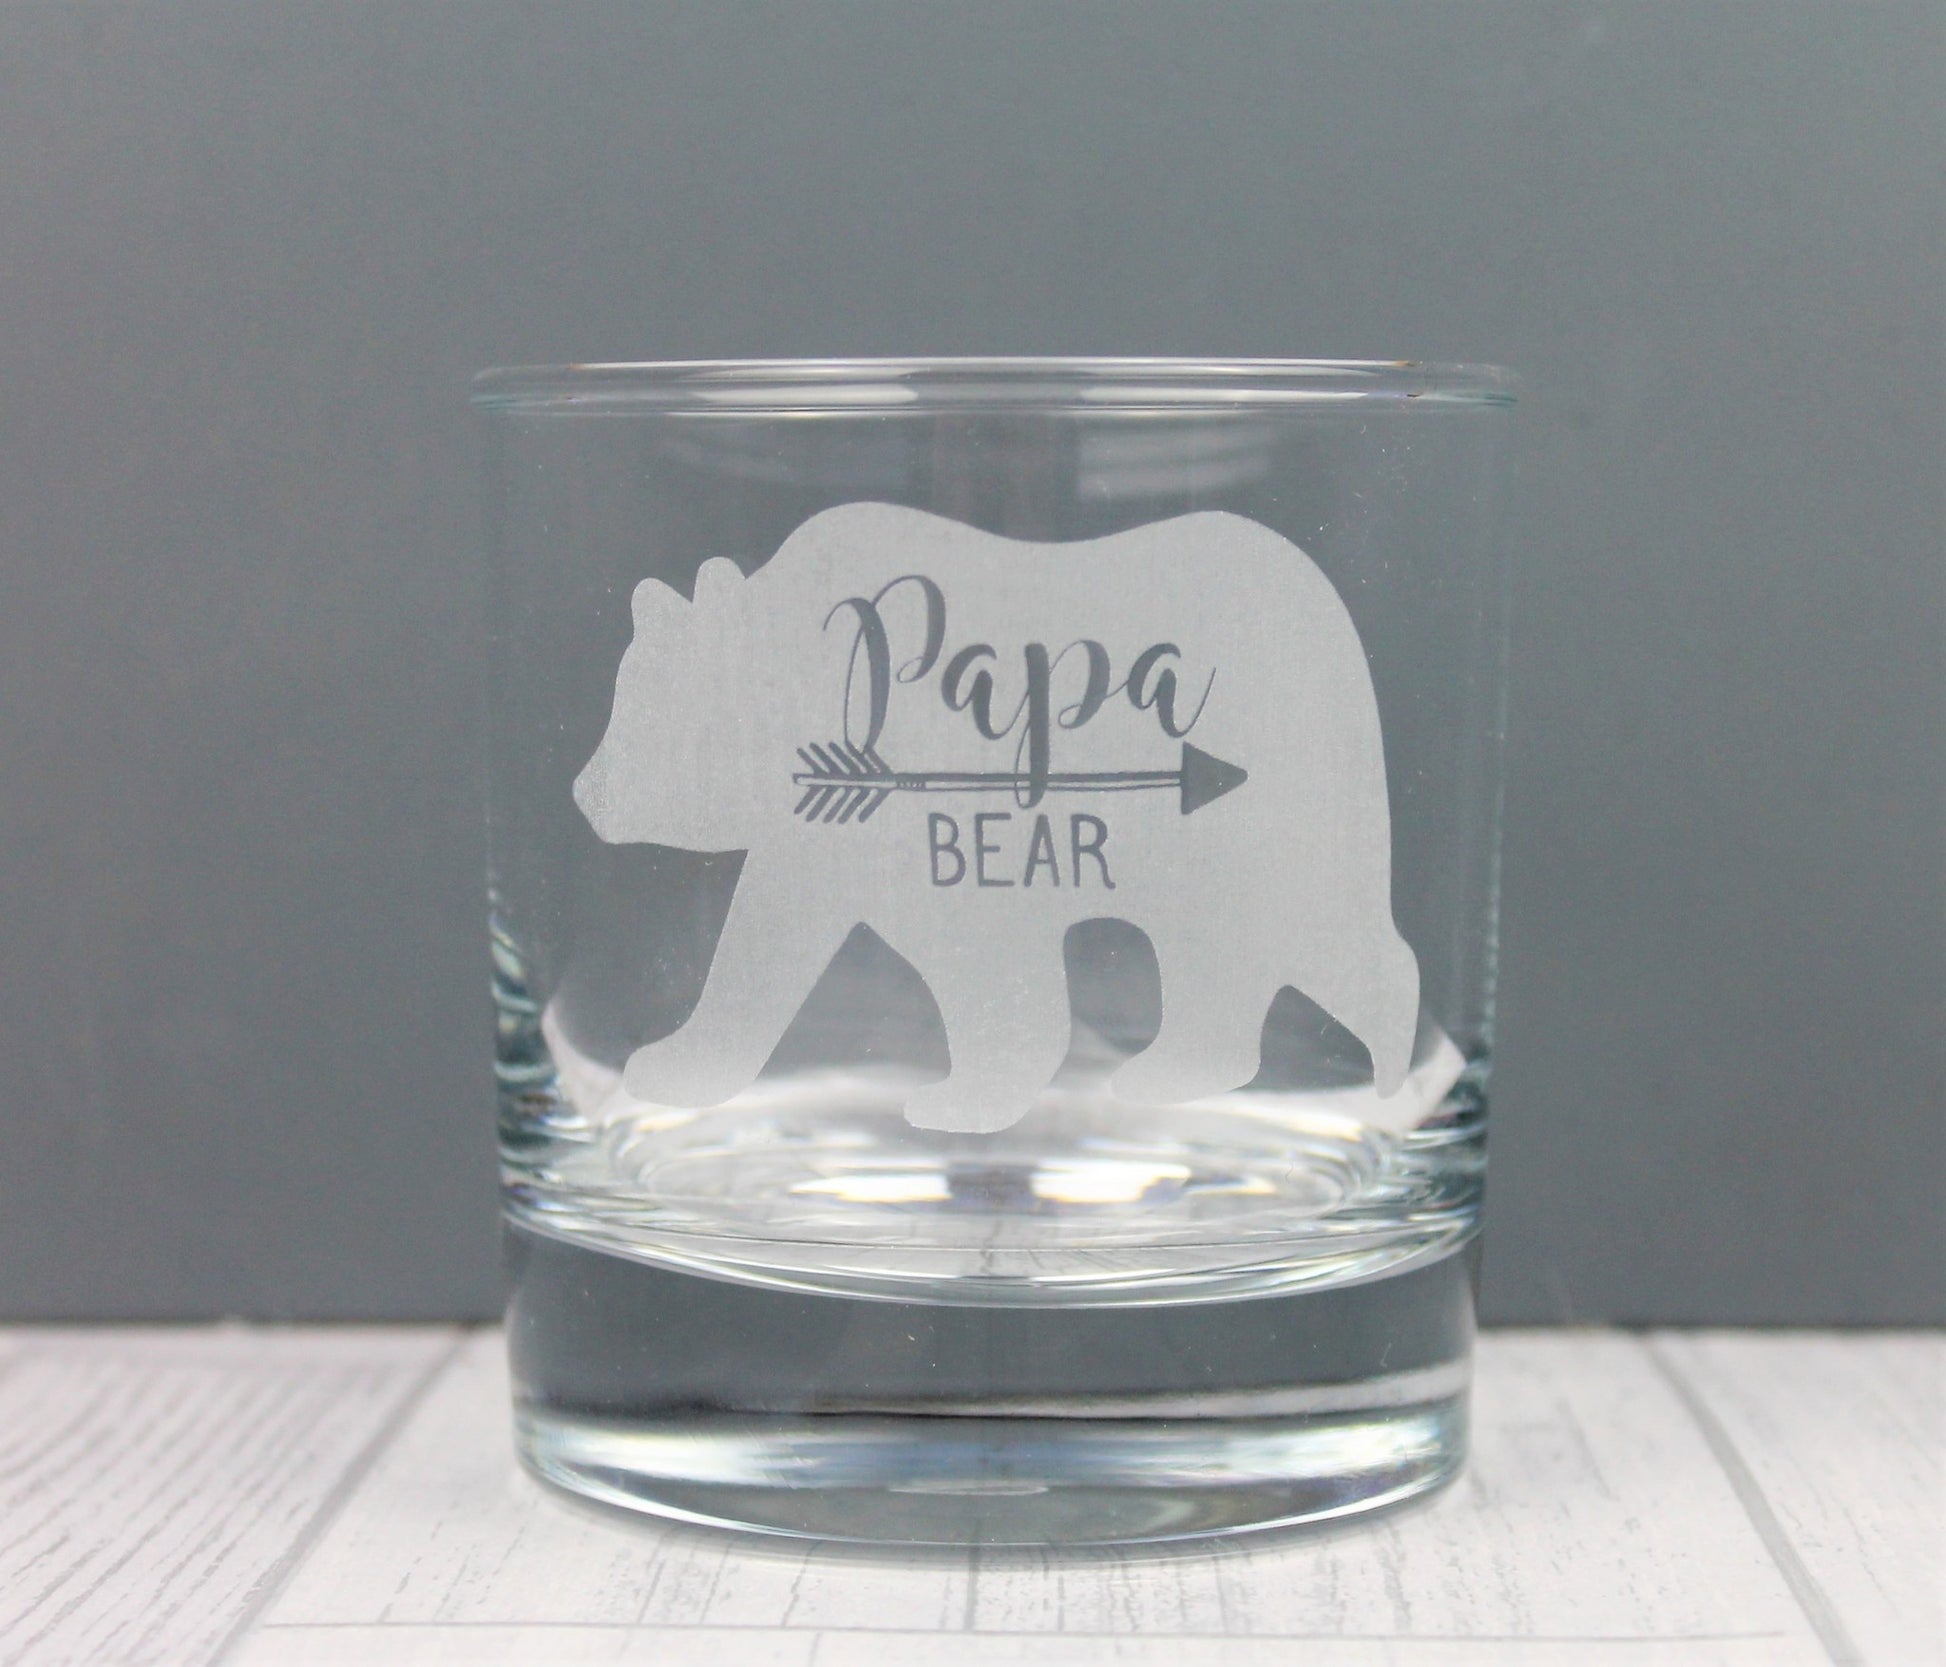 Papa bear engraved whisky glass with bear design 